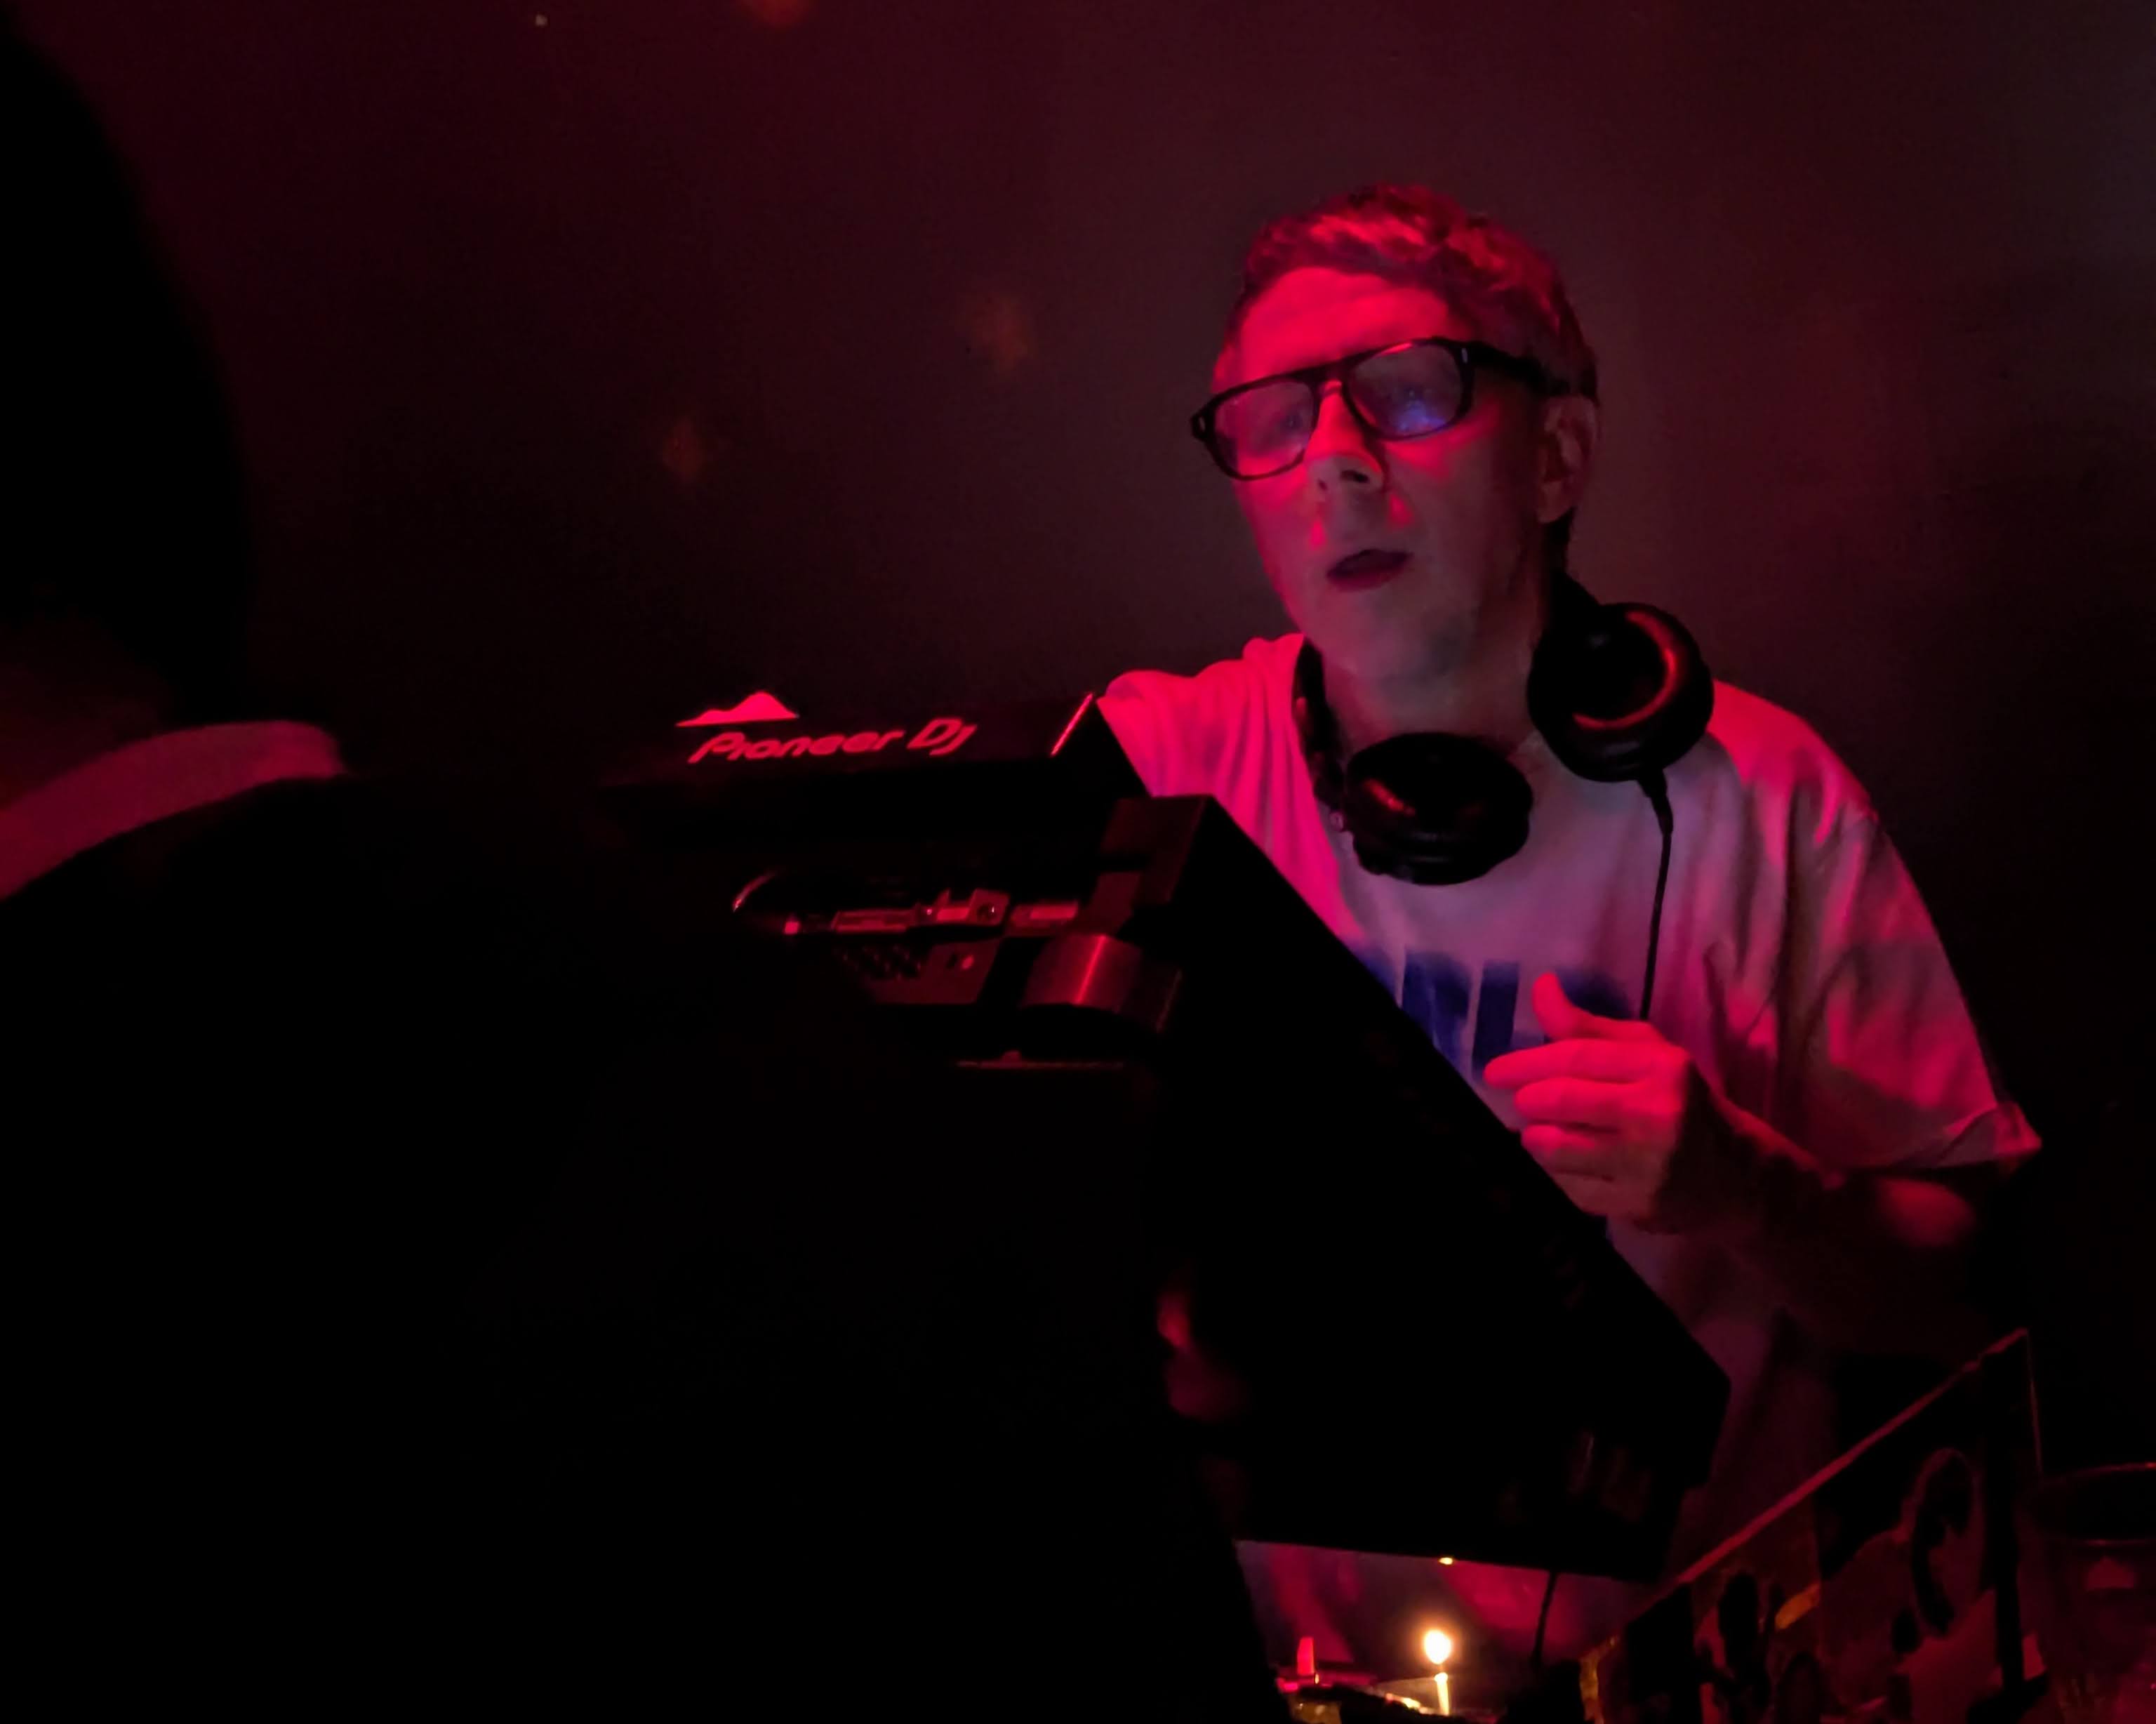 A photograph of Gilles Peterson DJing